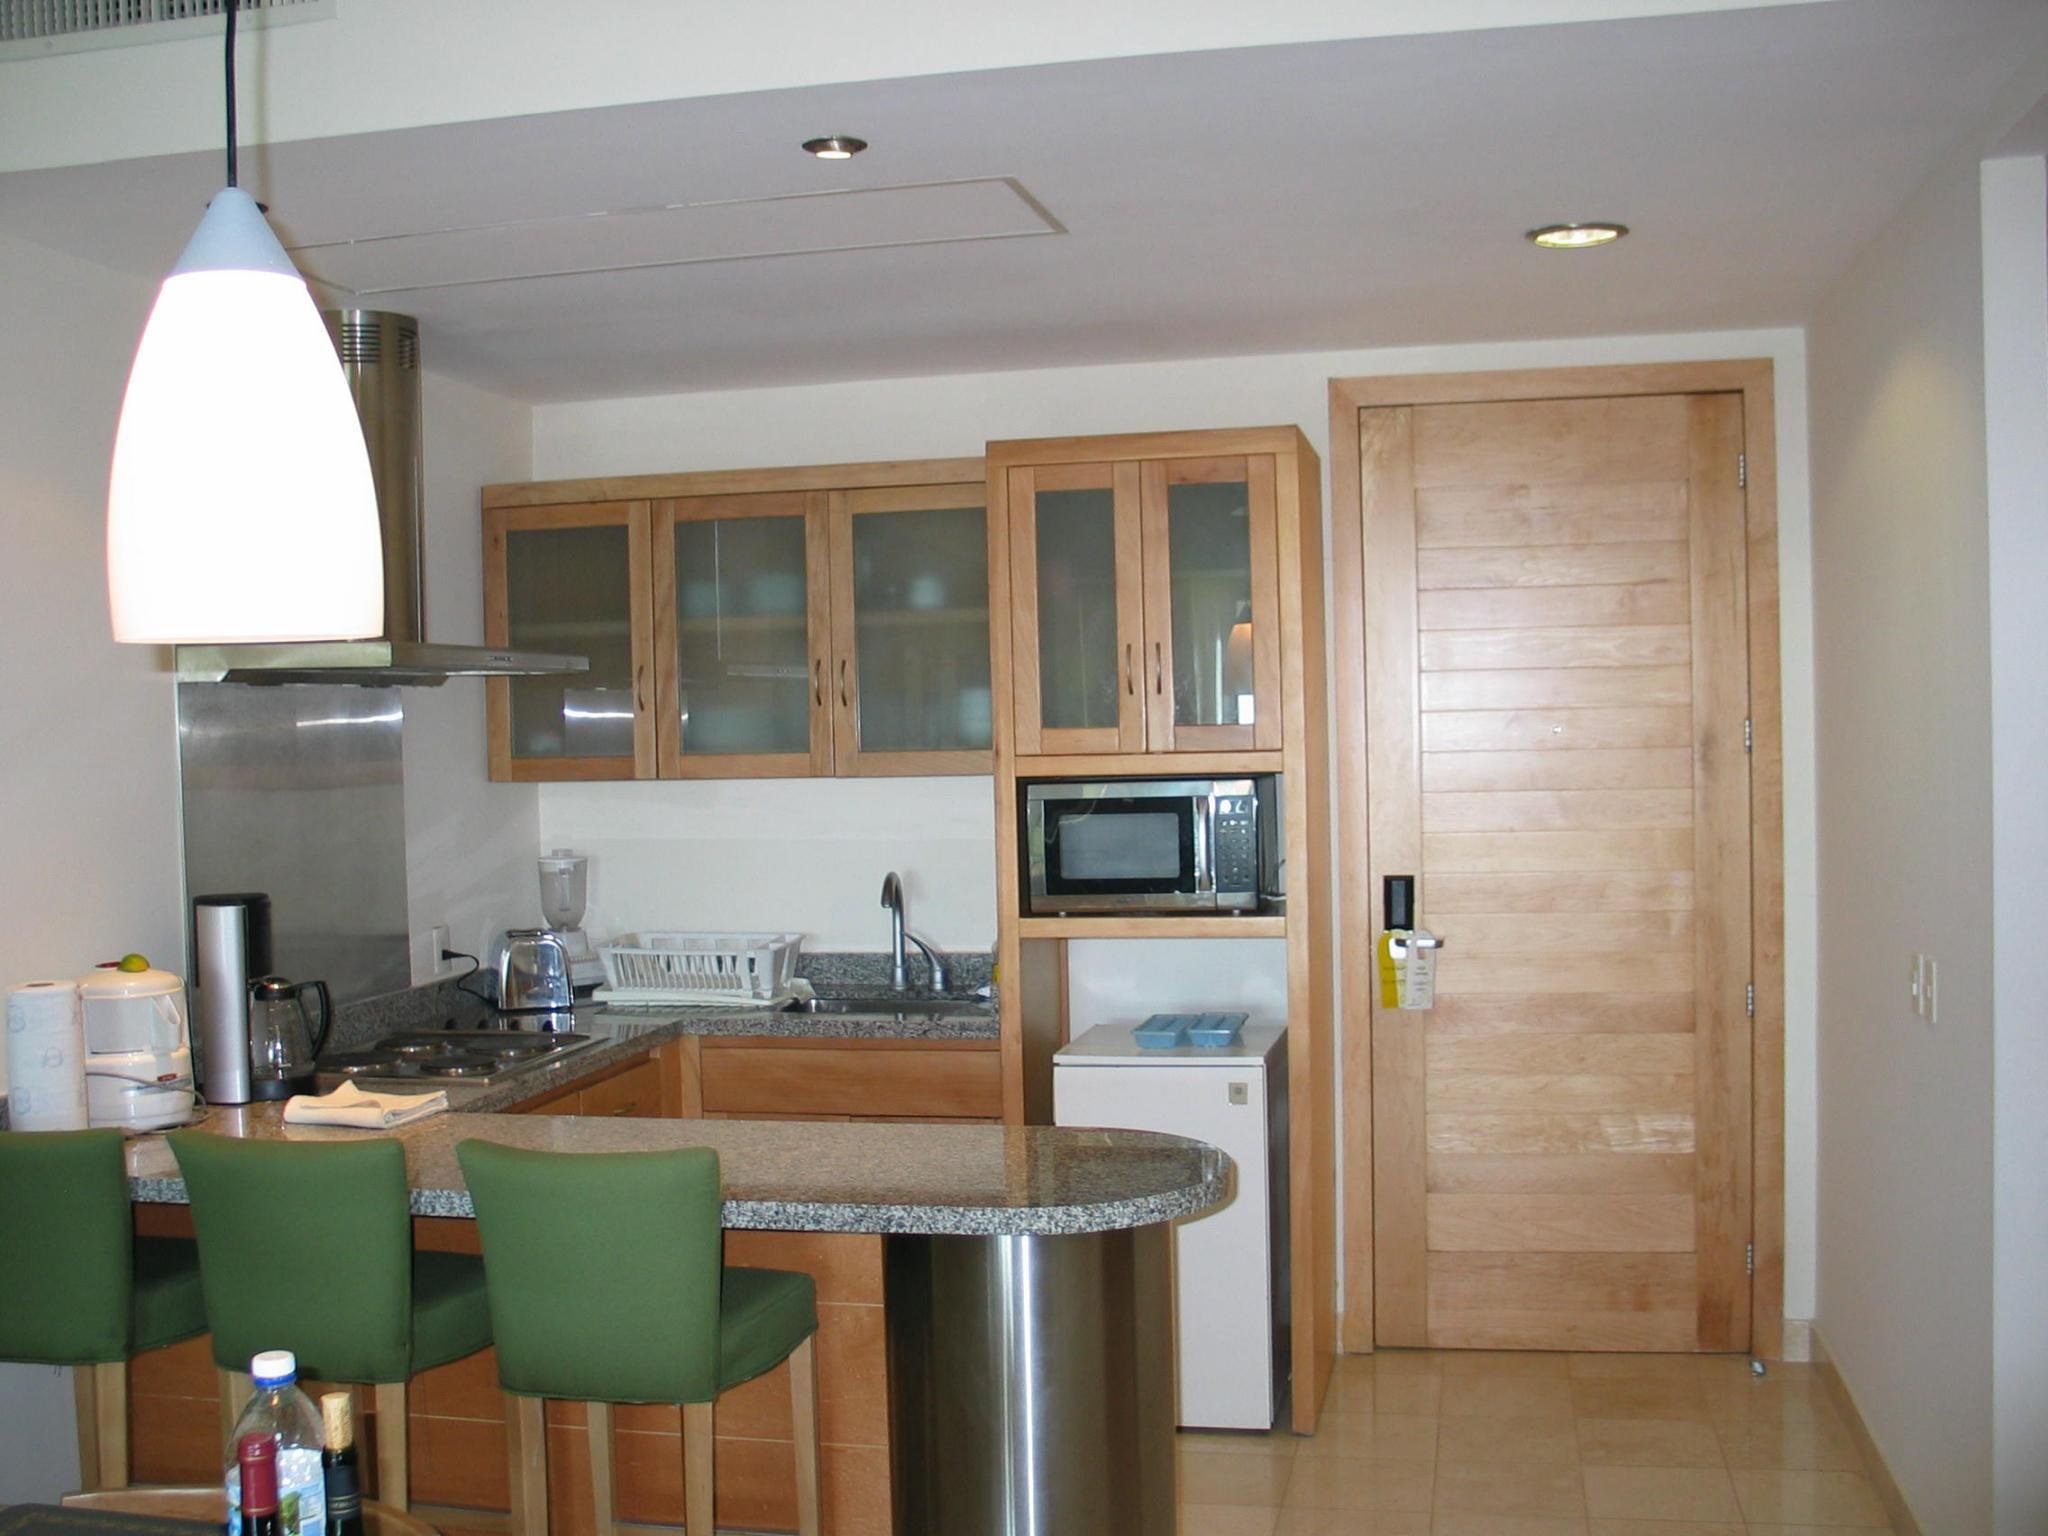 Sample kitchen in larger units.